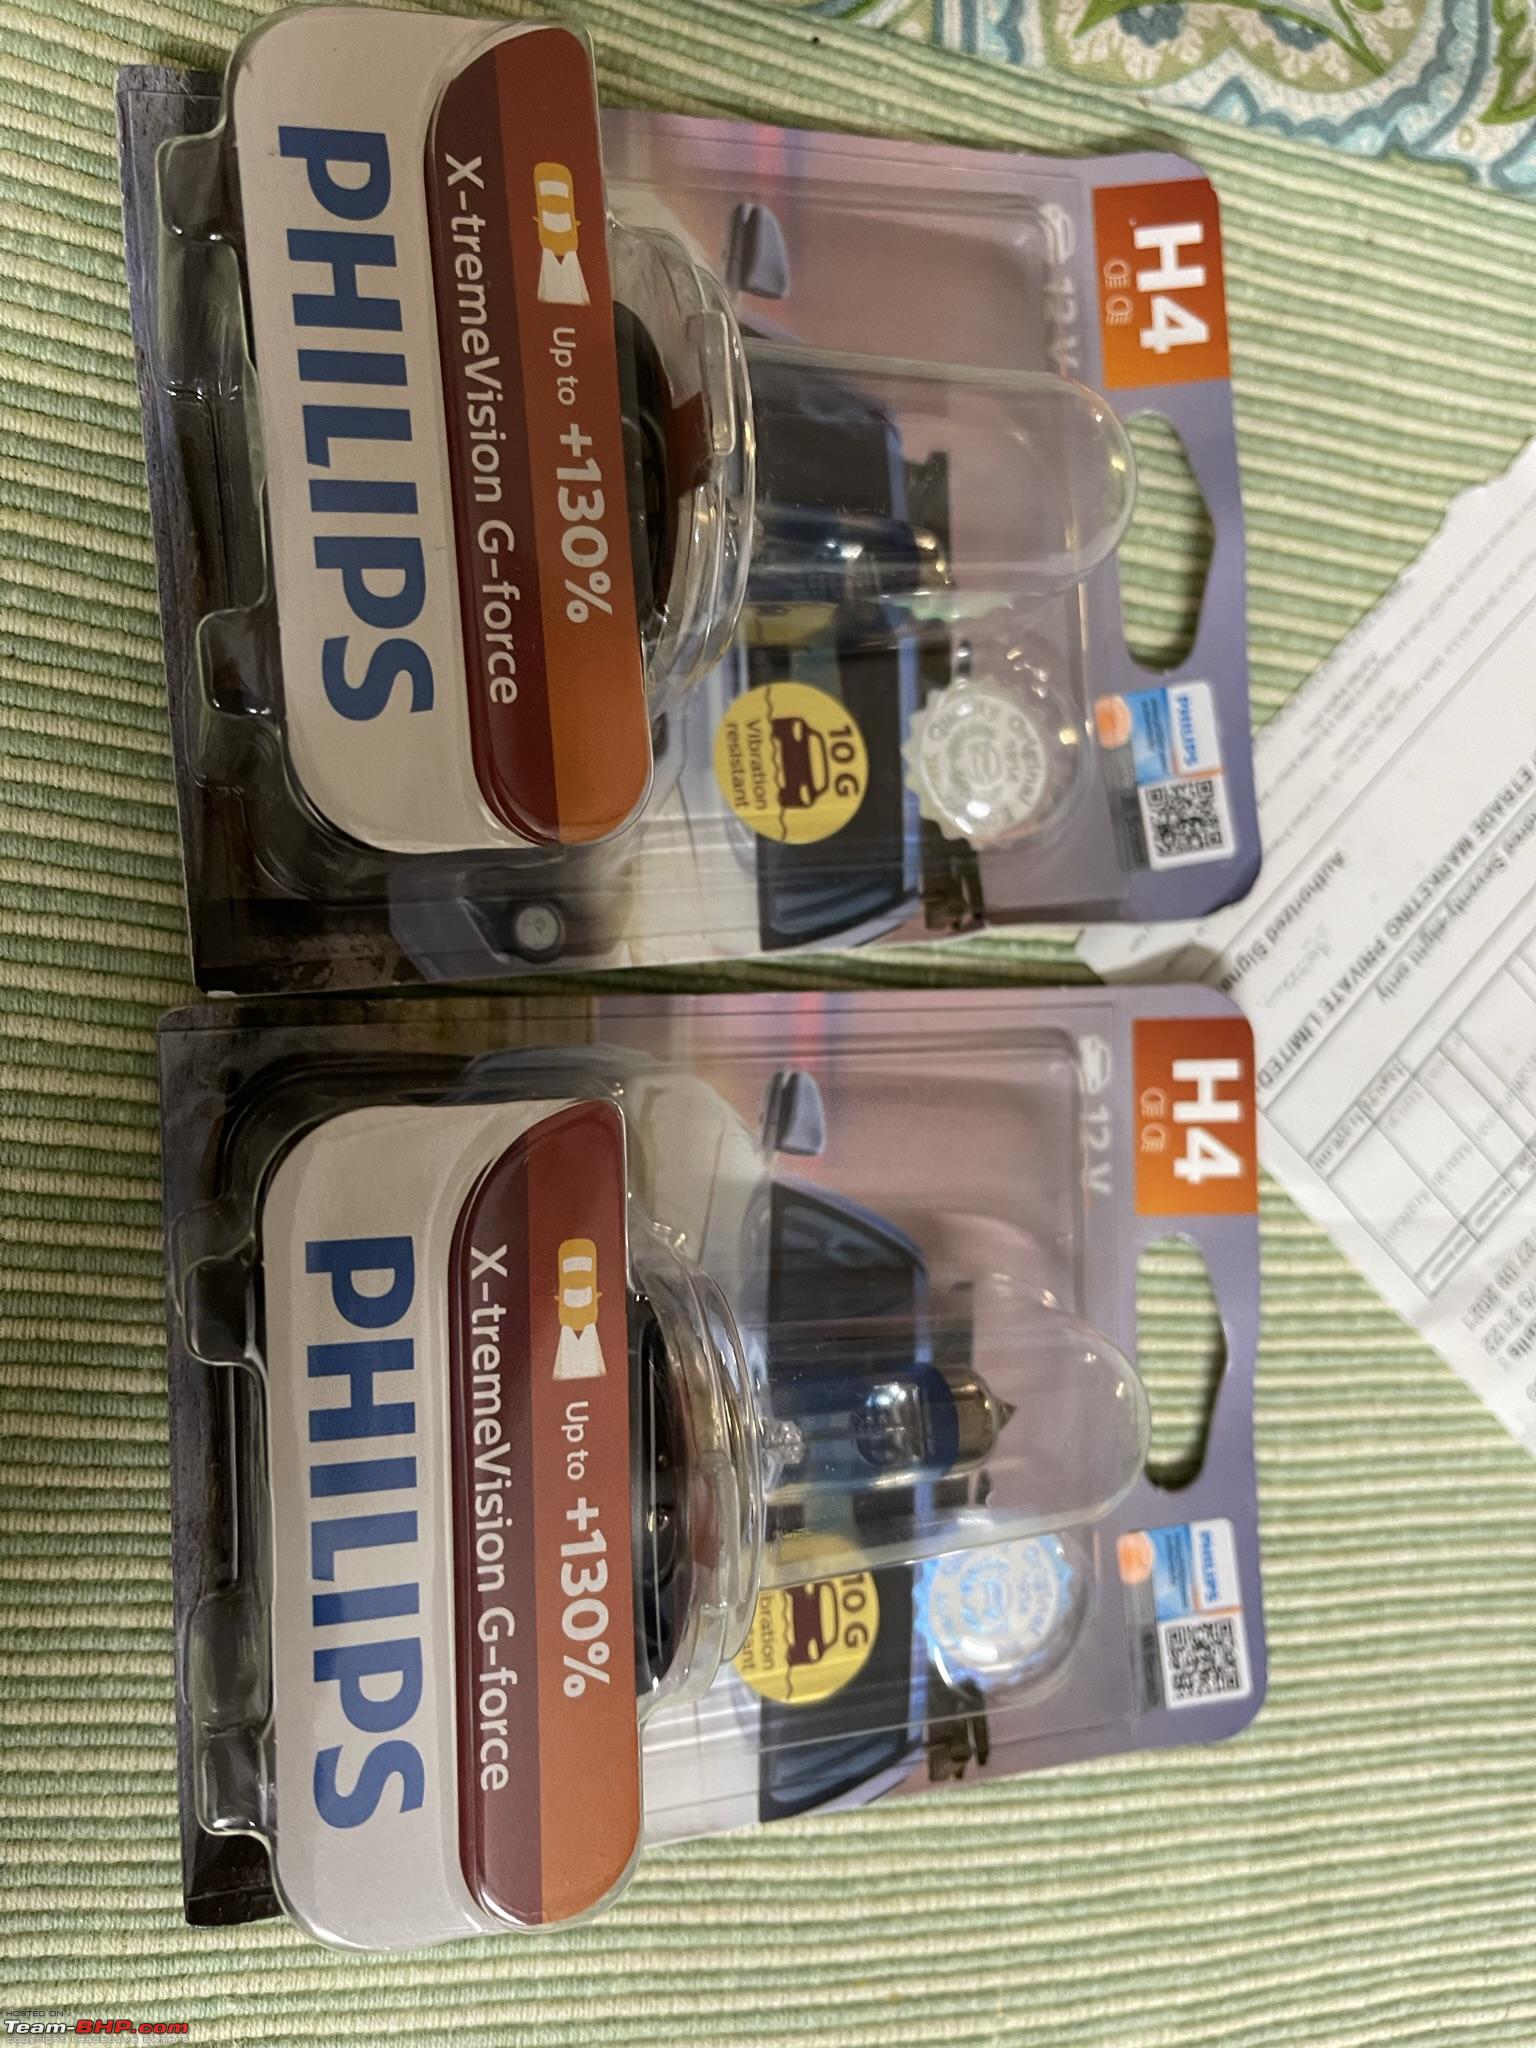 Philips H4 LED Headlight Bulb Review 